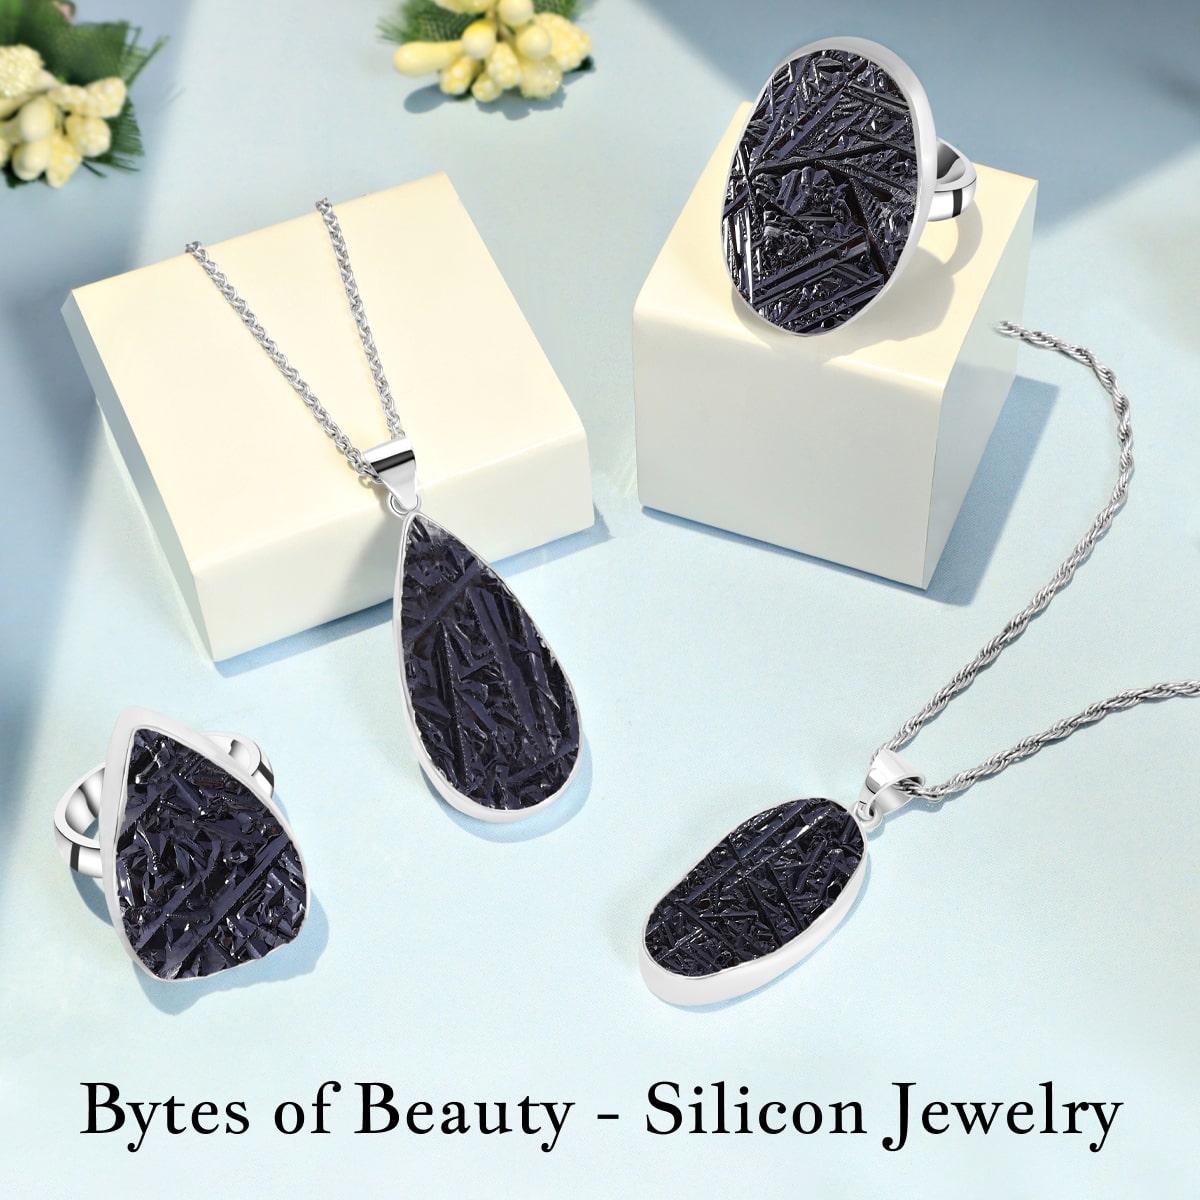 Silicon Jewelry